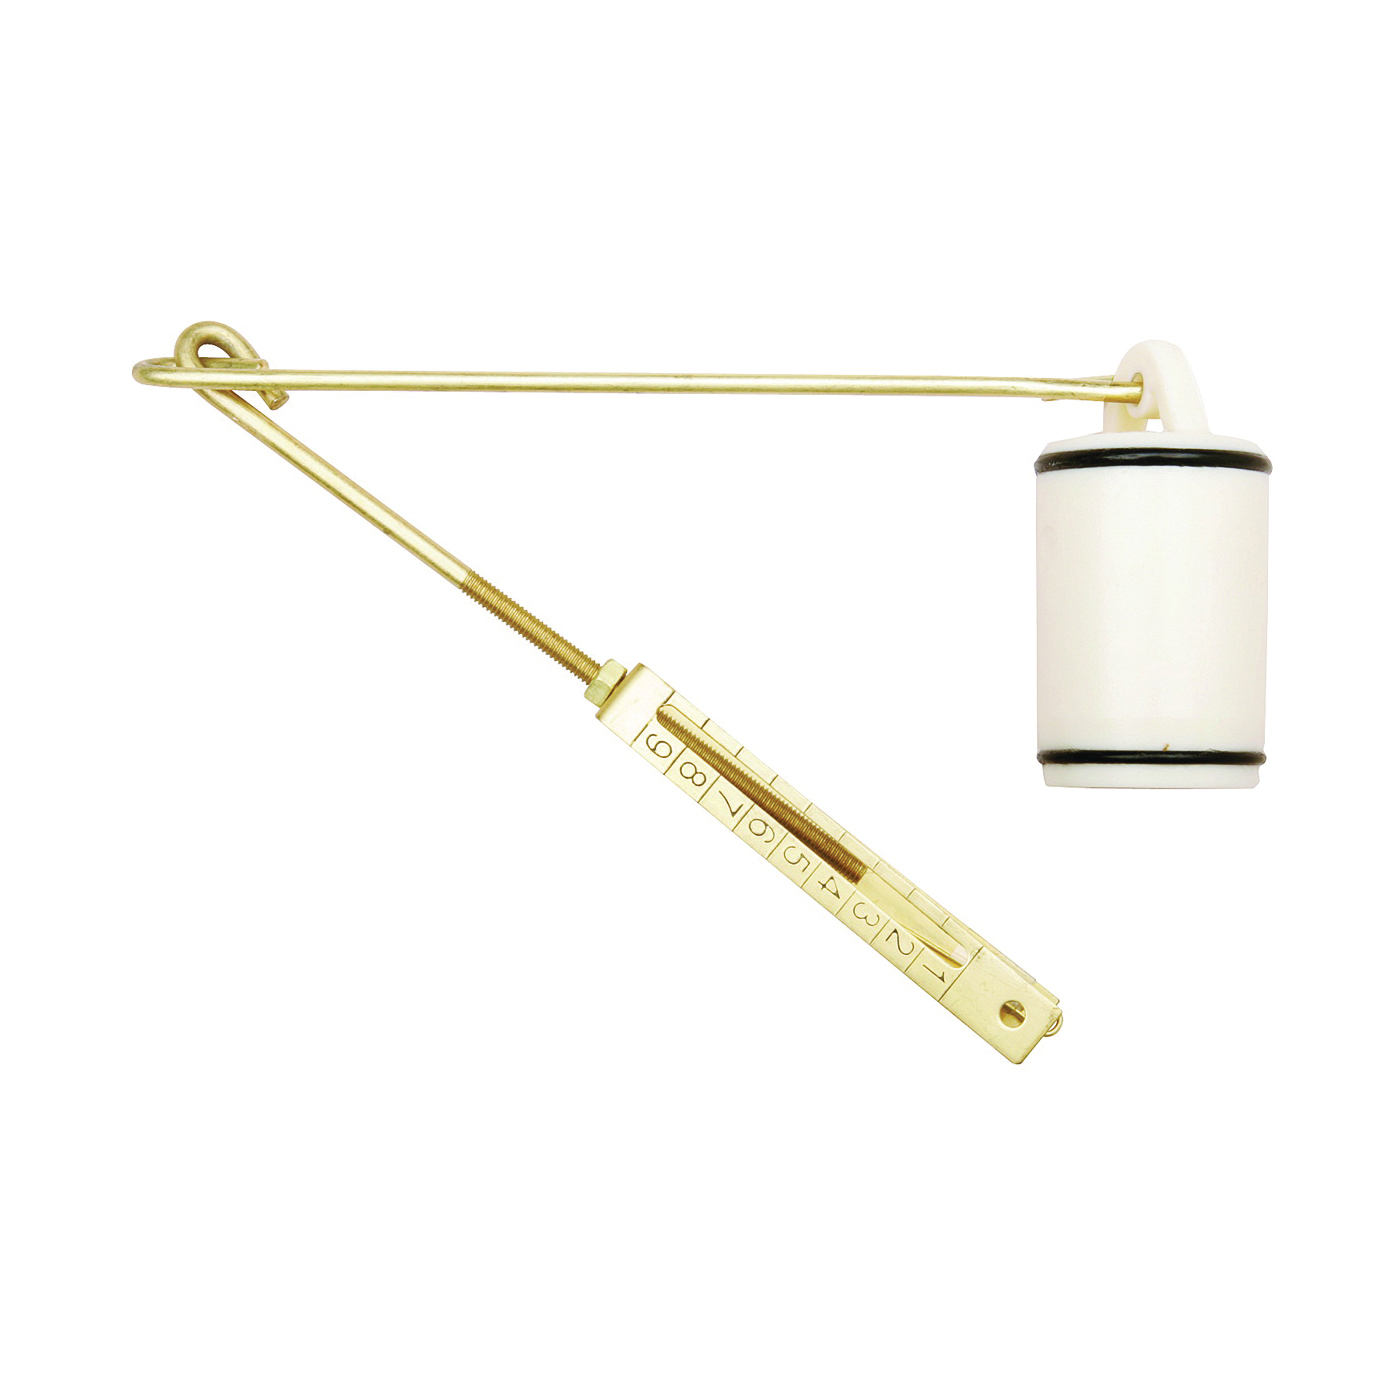 PP606-23 Linkage Assembly, Brass, White, For: Trip-Lever 6 in Eye Wire, #10 to #32 Eye Bolts